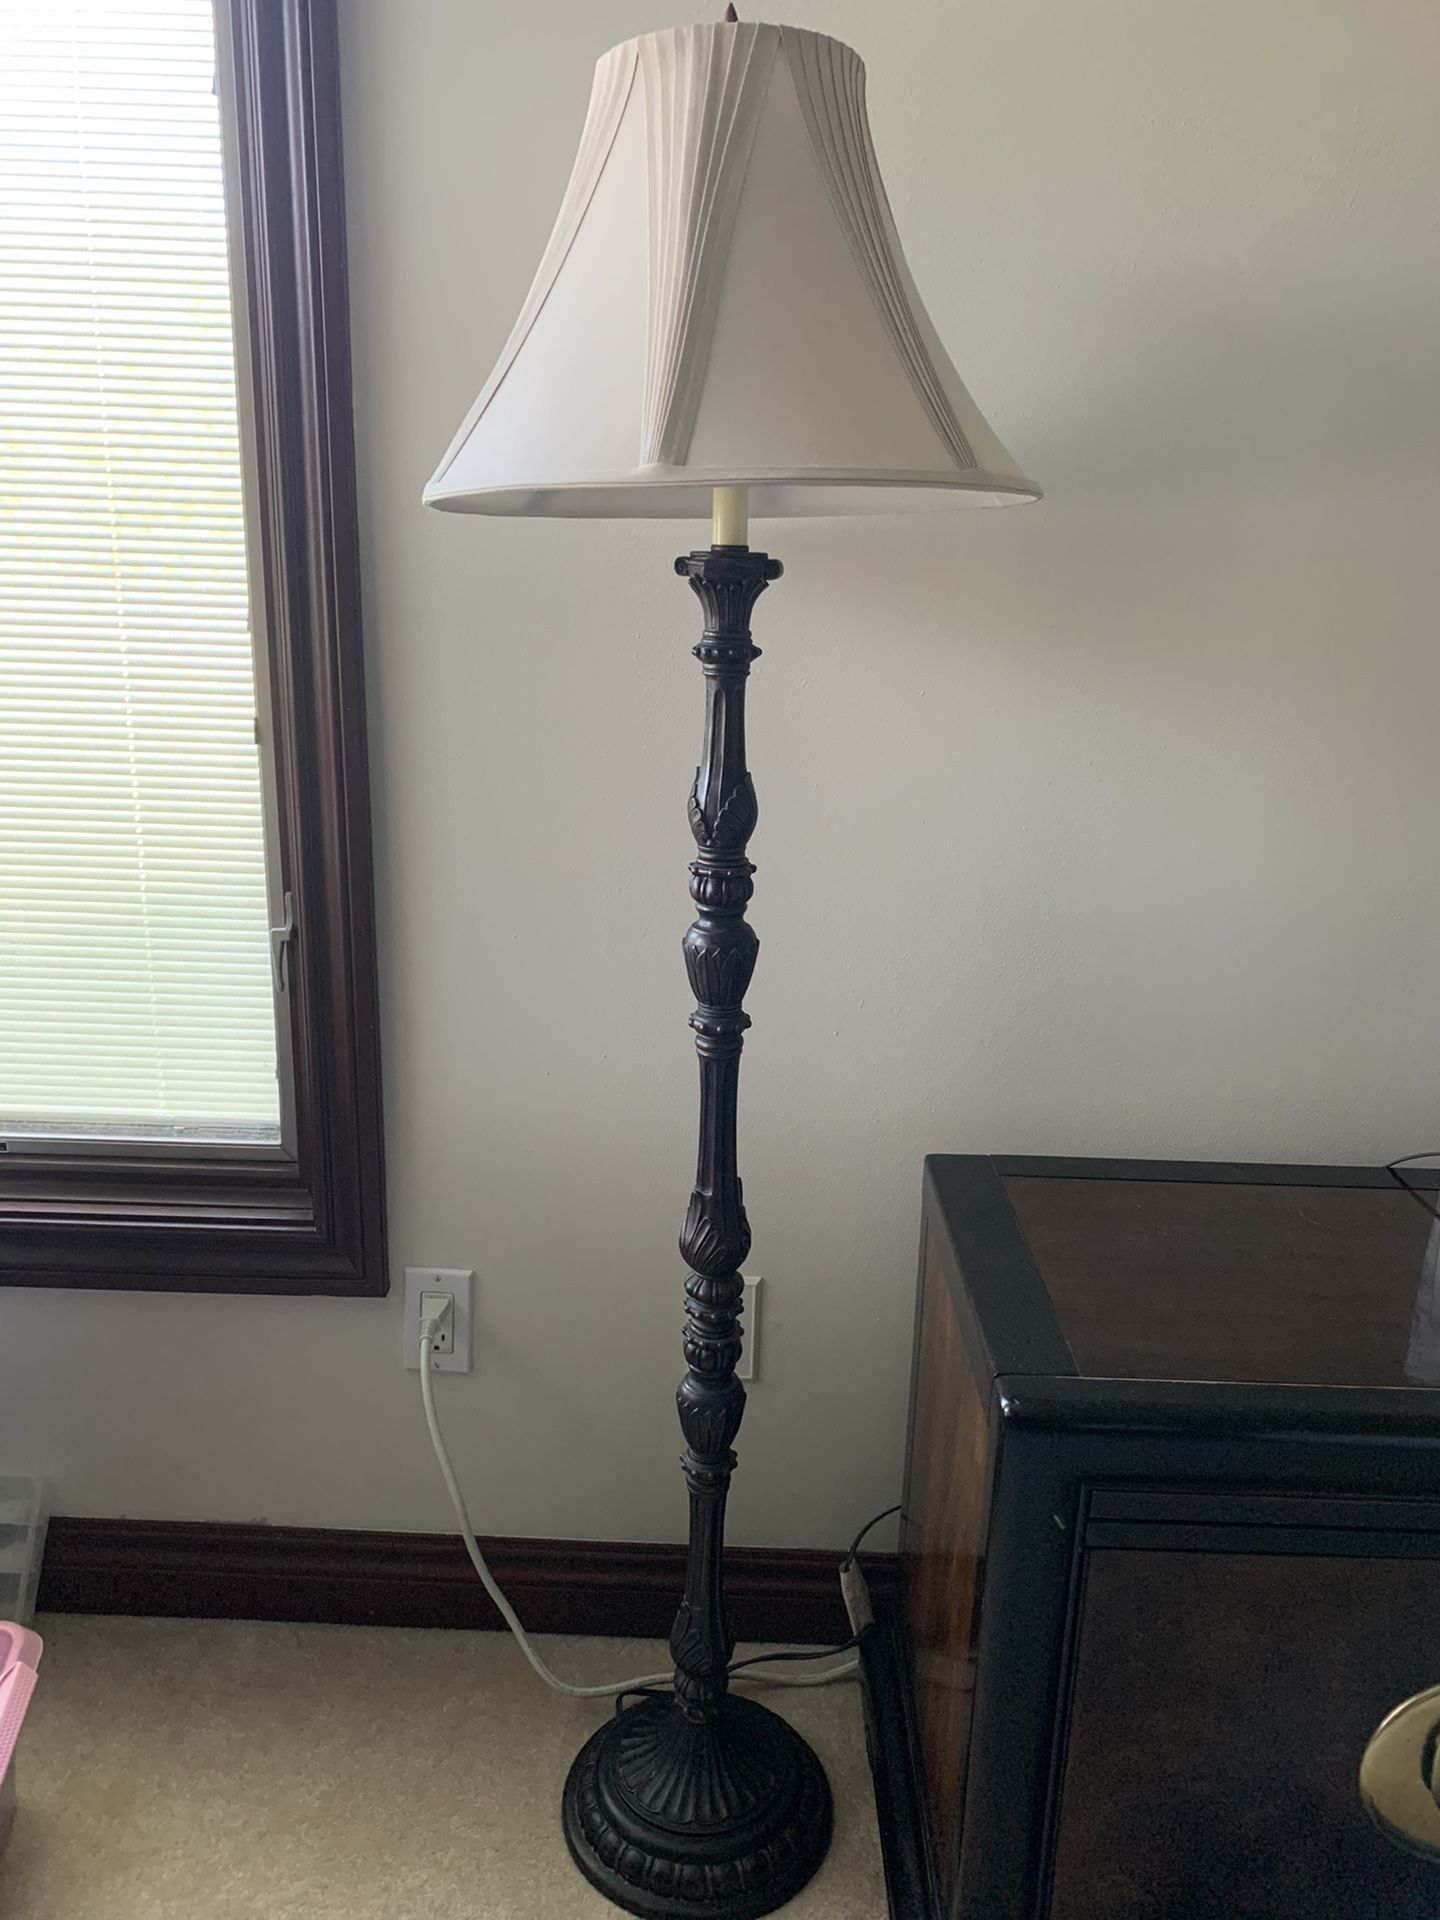 Floor lamp with lamp shade